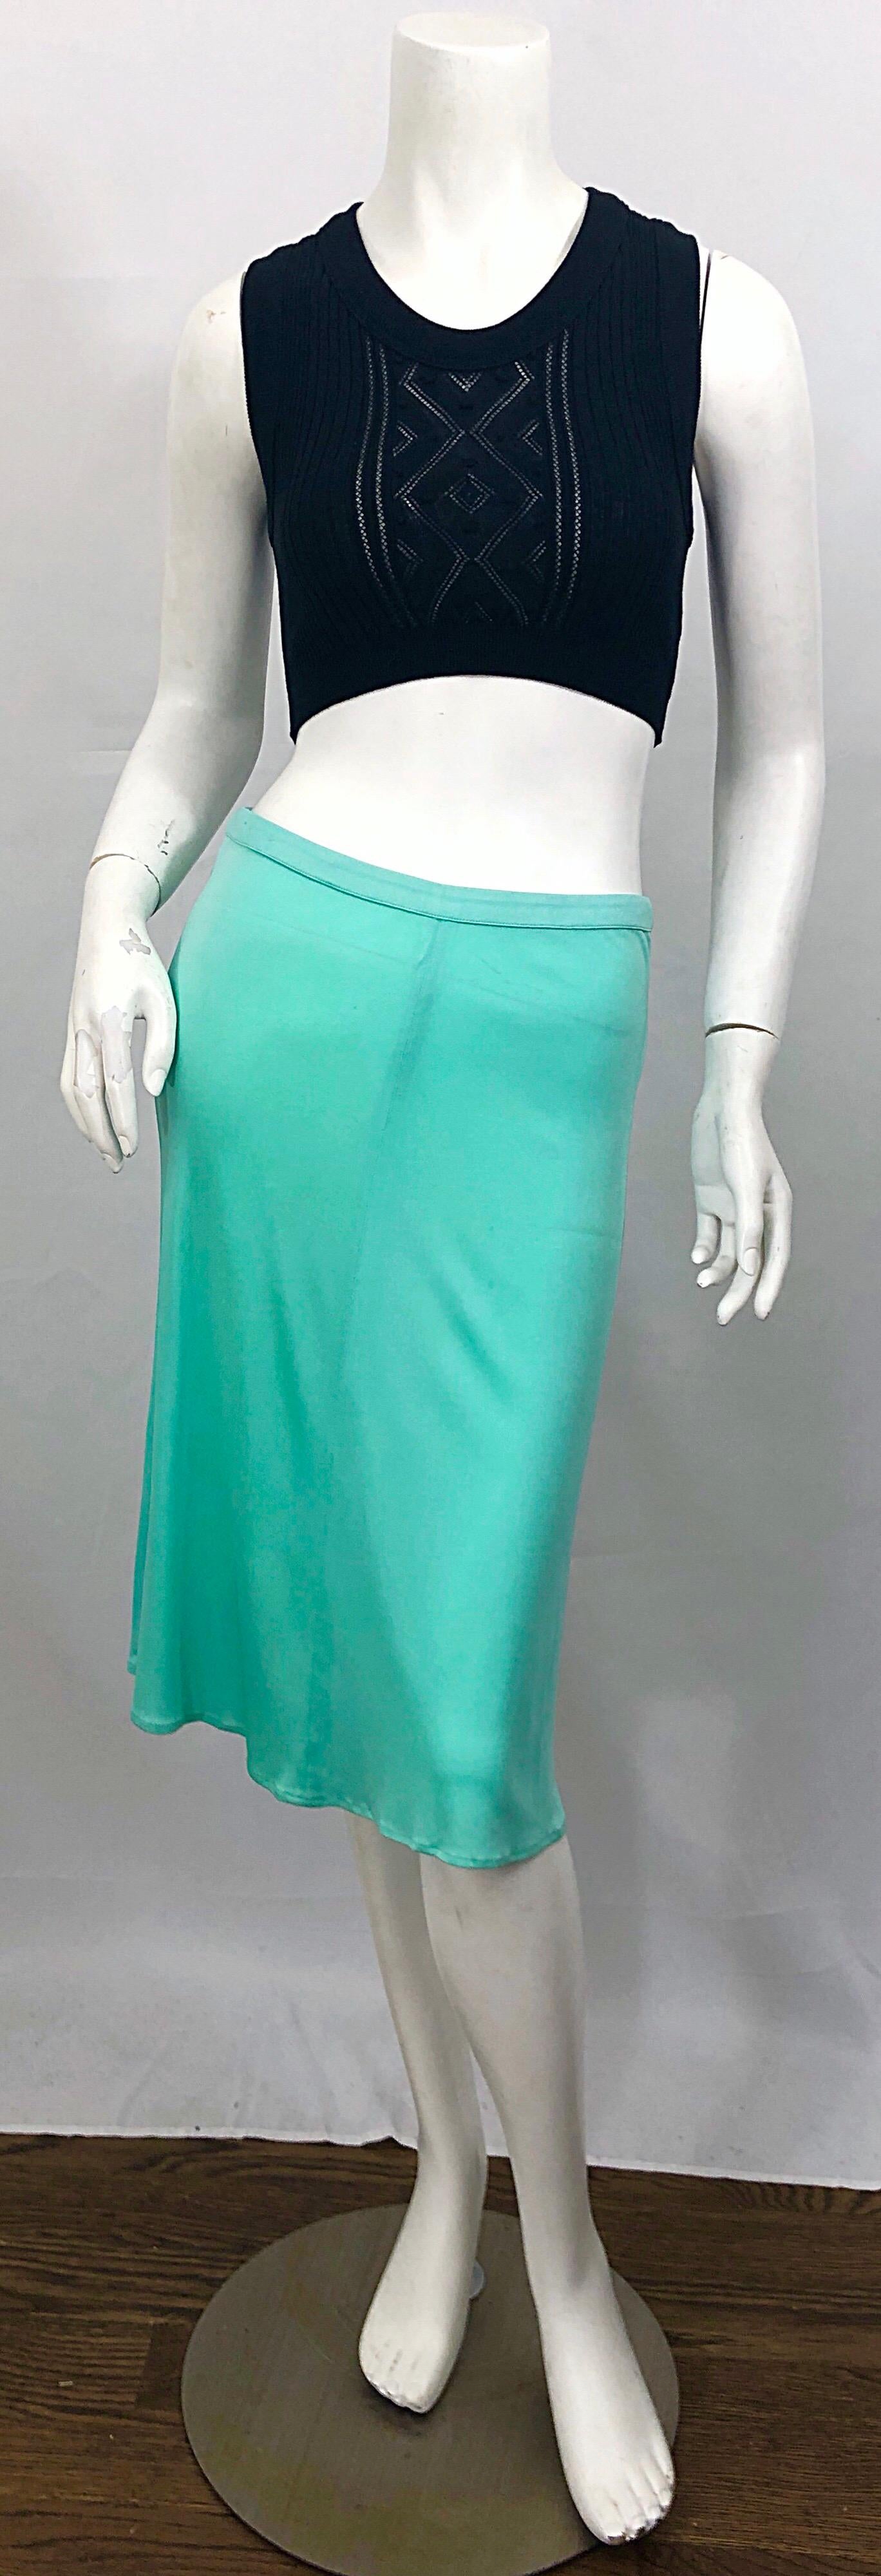 The ultimate 1990s vintage GIANNI VERSACE COUTURE turquoise / teal blue slink silk jersey skirt! The perfect vibrant blue color adds a pop of color to any outfit. Sits on the hips, with hidden zipper up the back and hook-and-eye closure. The